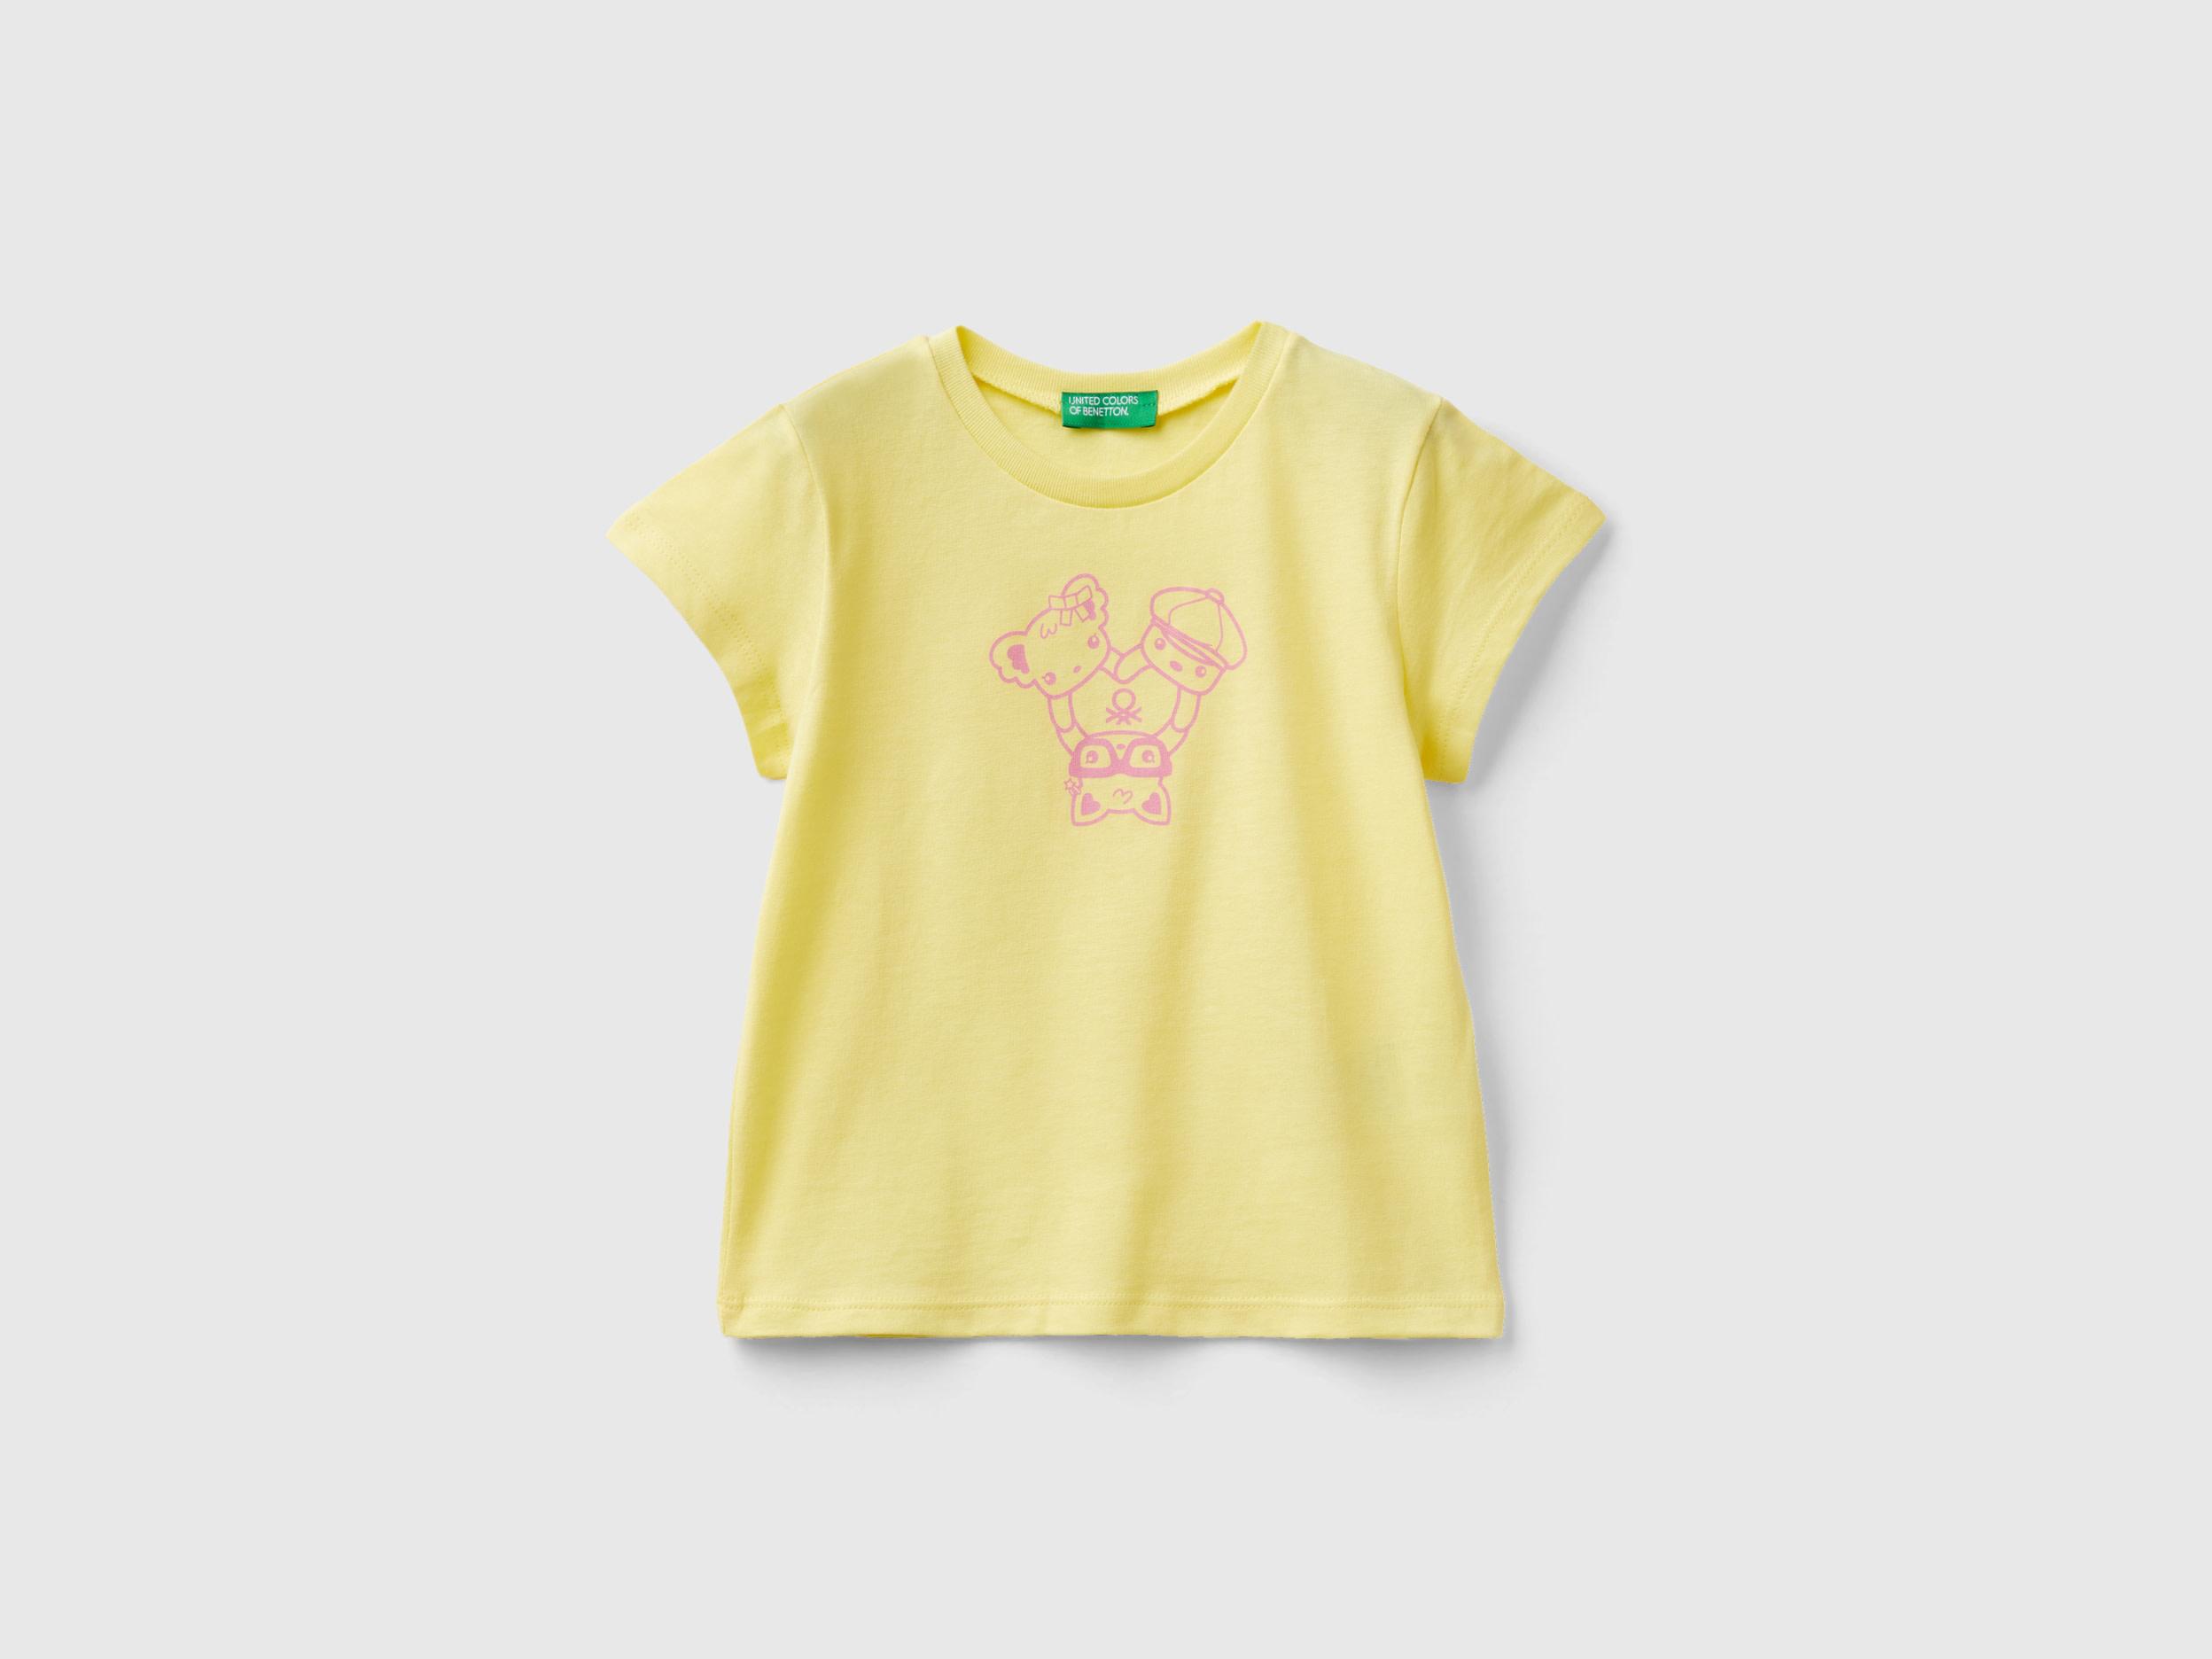 Image of Benetton, 100% Cotton T-shirt With Print, size 82, Yellow, Kids